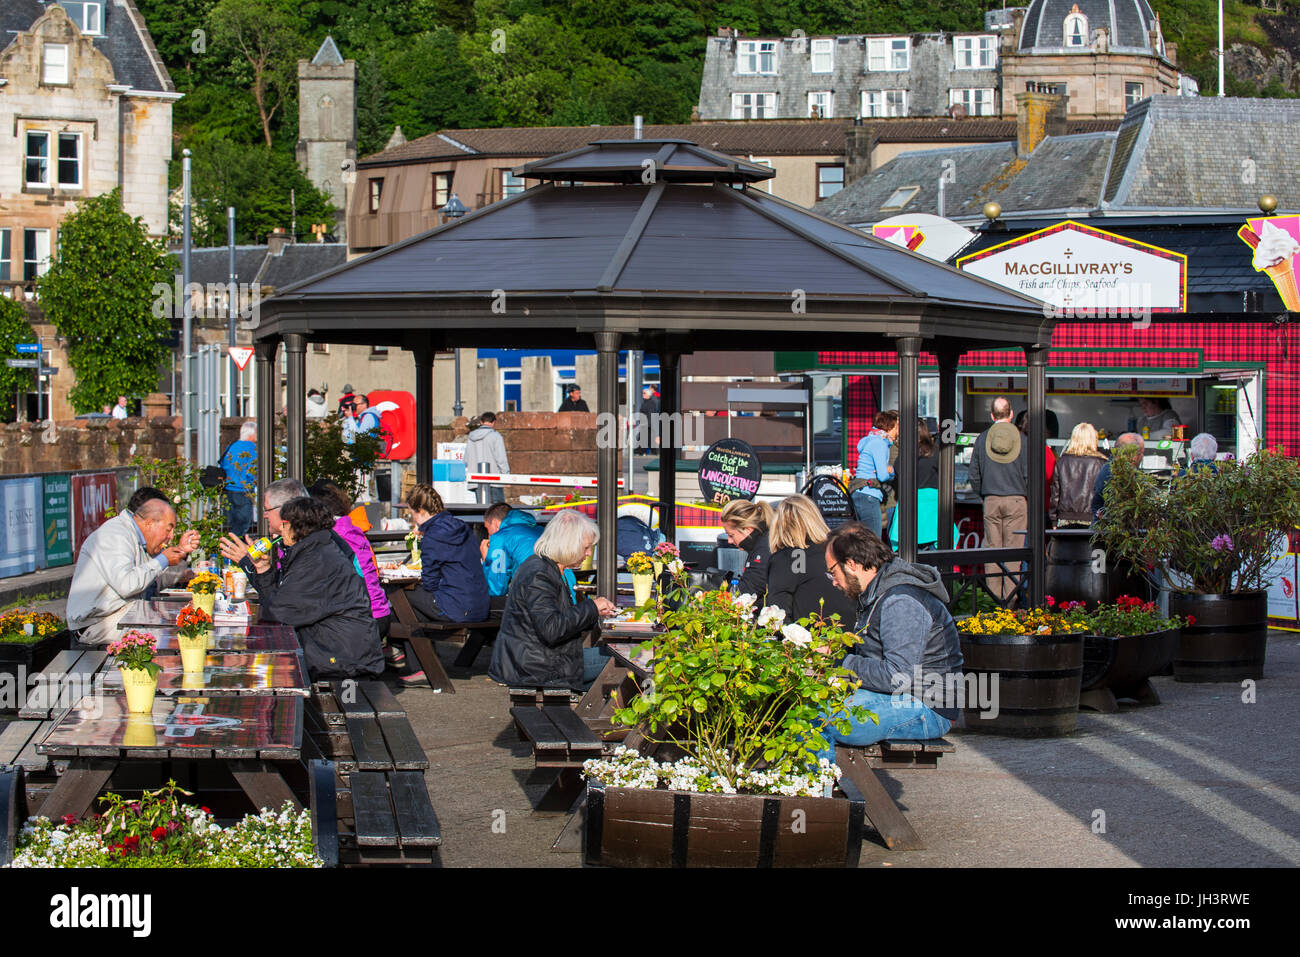 Tourists eating seafood at fish and chips stand in the city Oban, Argyll and Bute, Scotland, UK Stock Photo